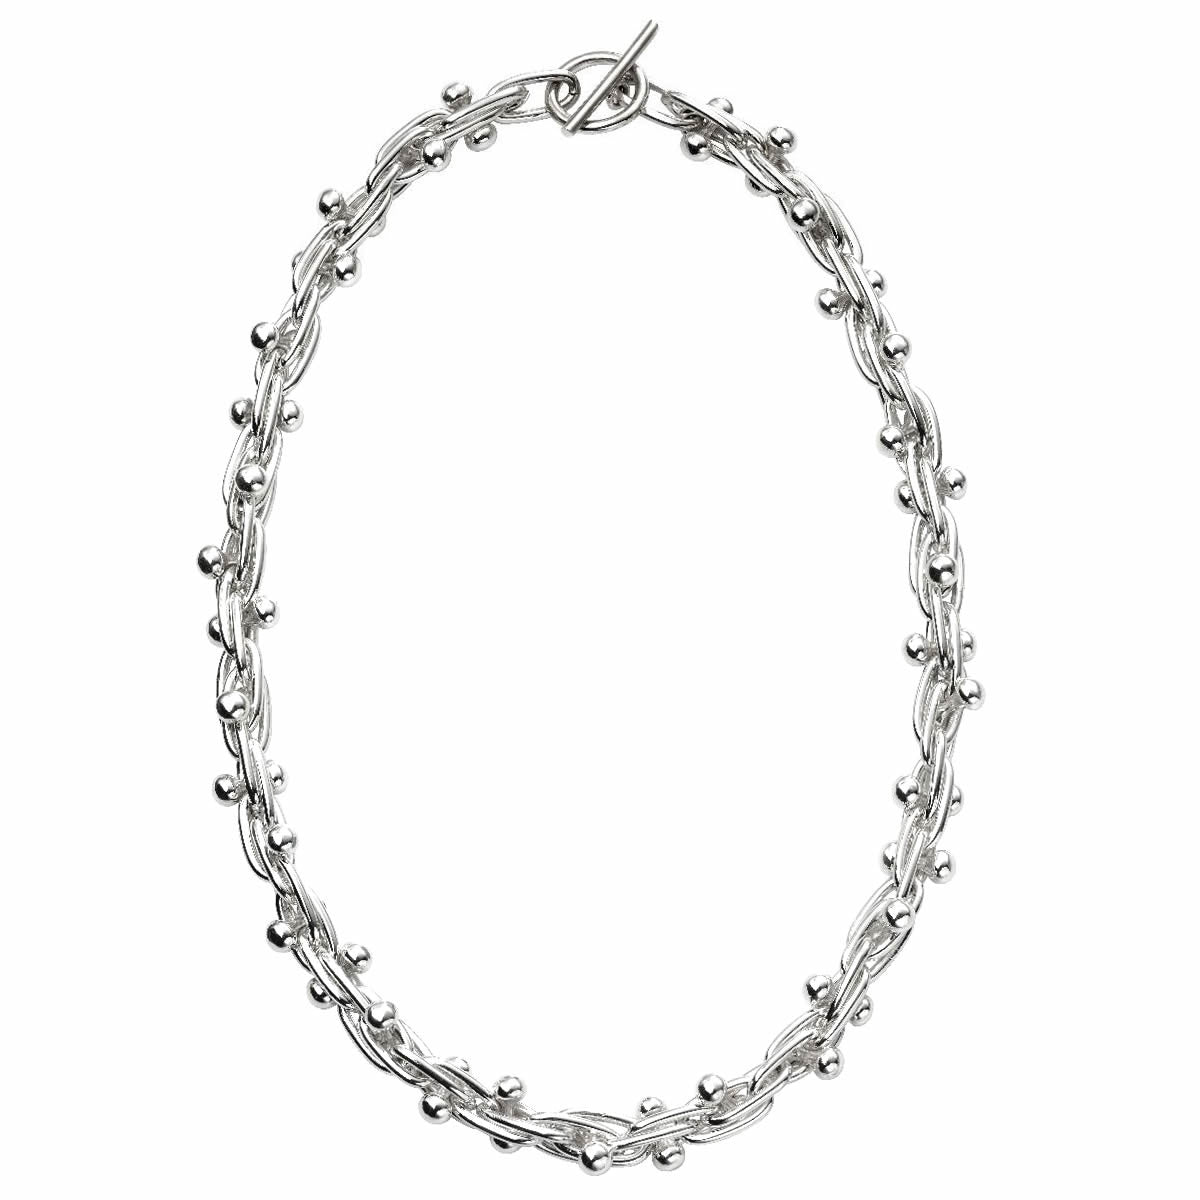 Topshop Nina chunky square link T-bar necklace in silver tone | ASOS